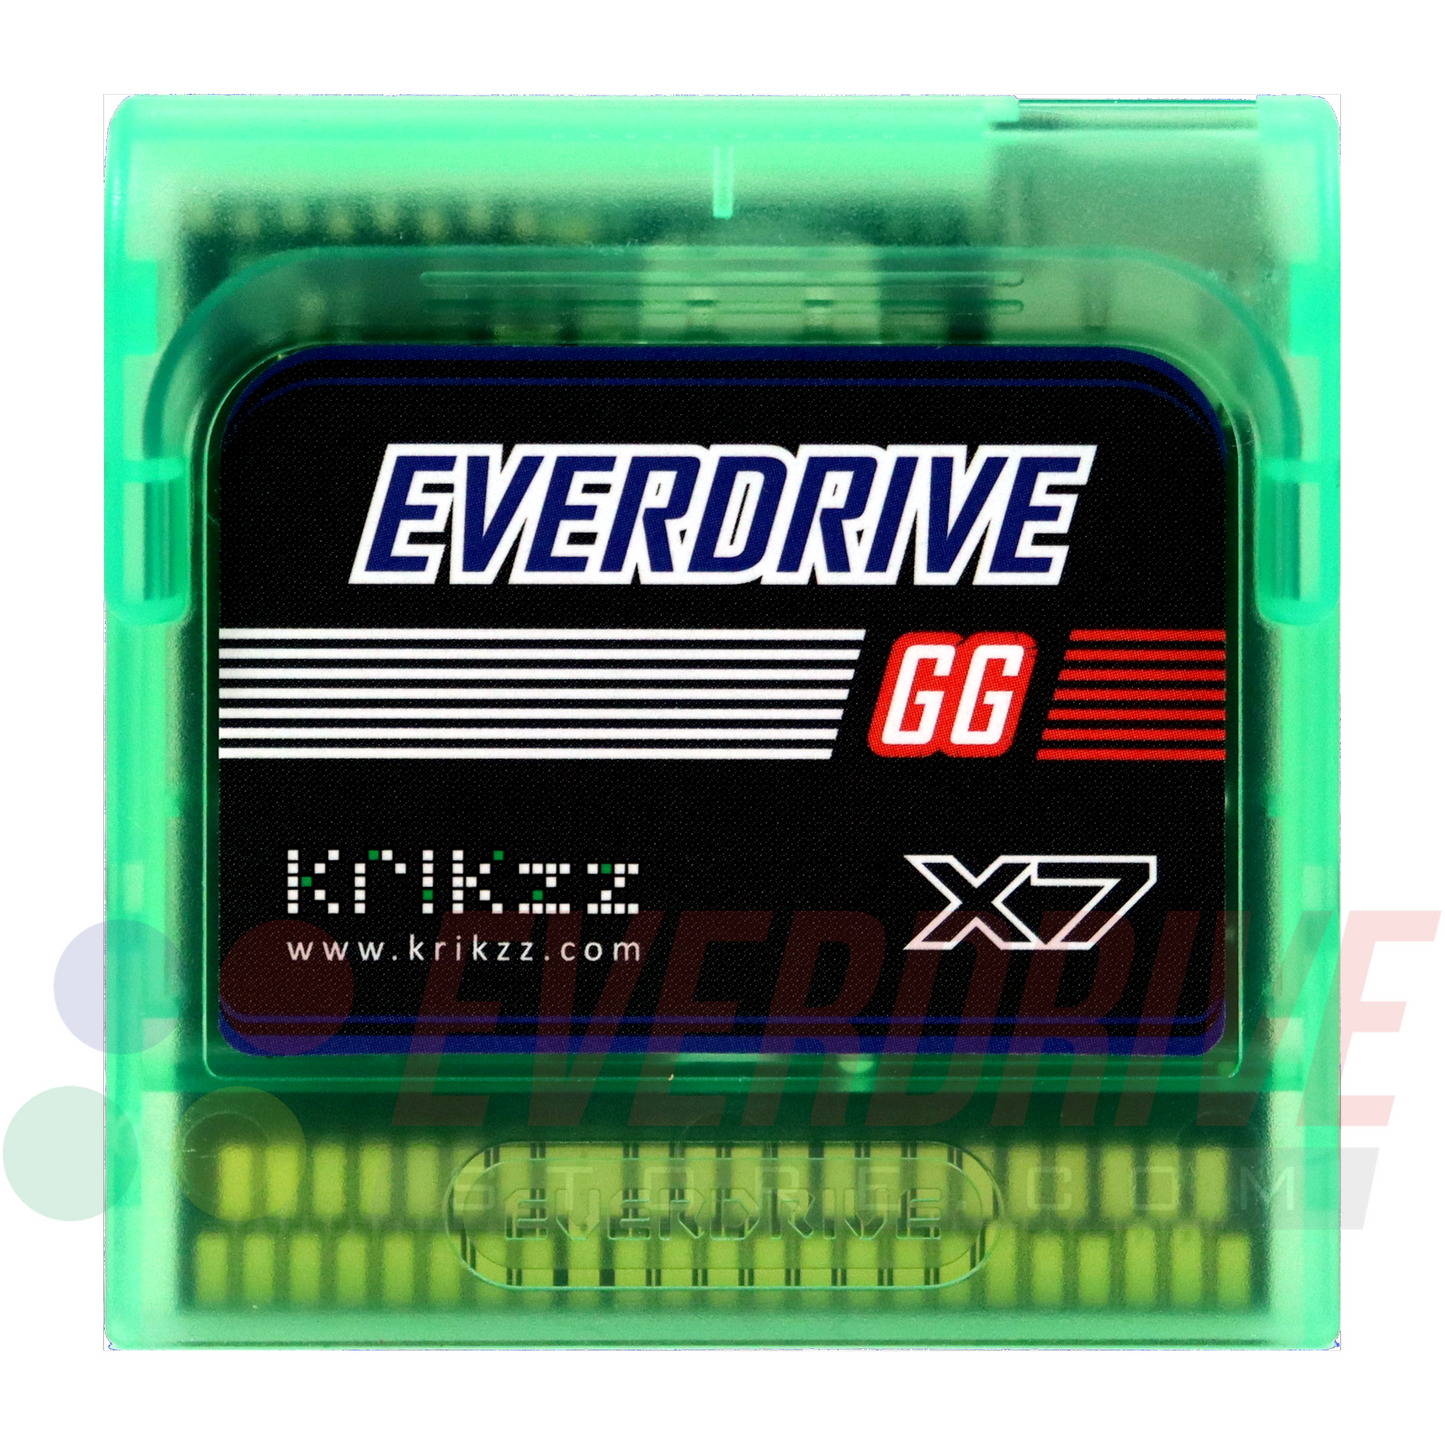 Everdrive GG X7 - Frosted Green